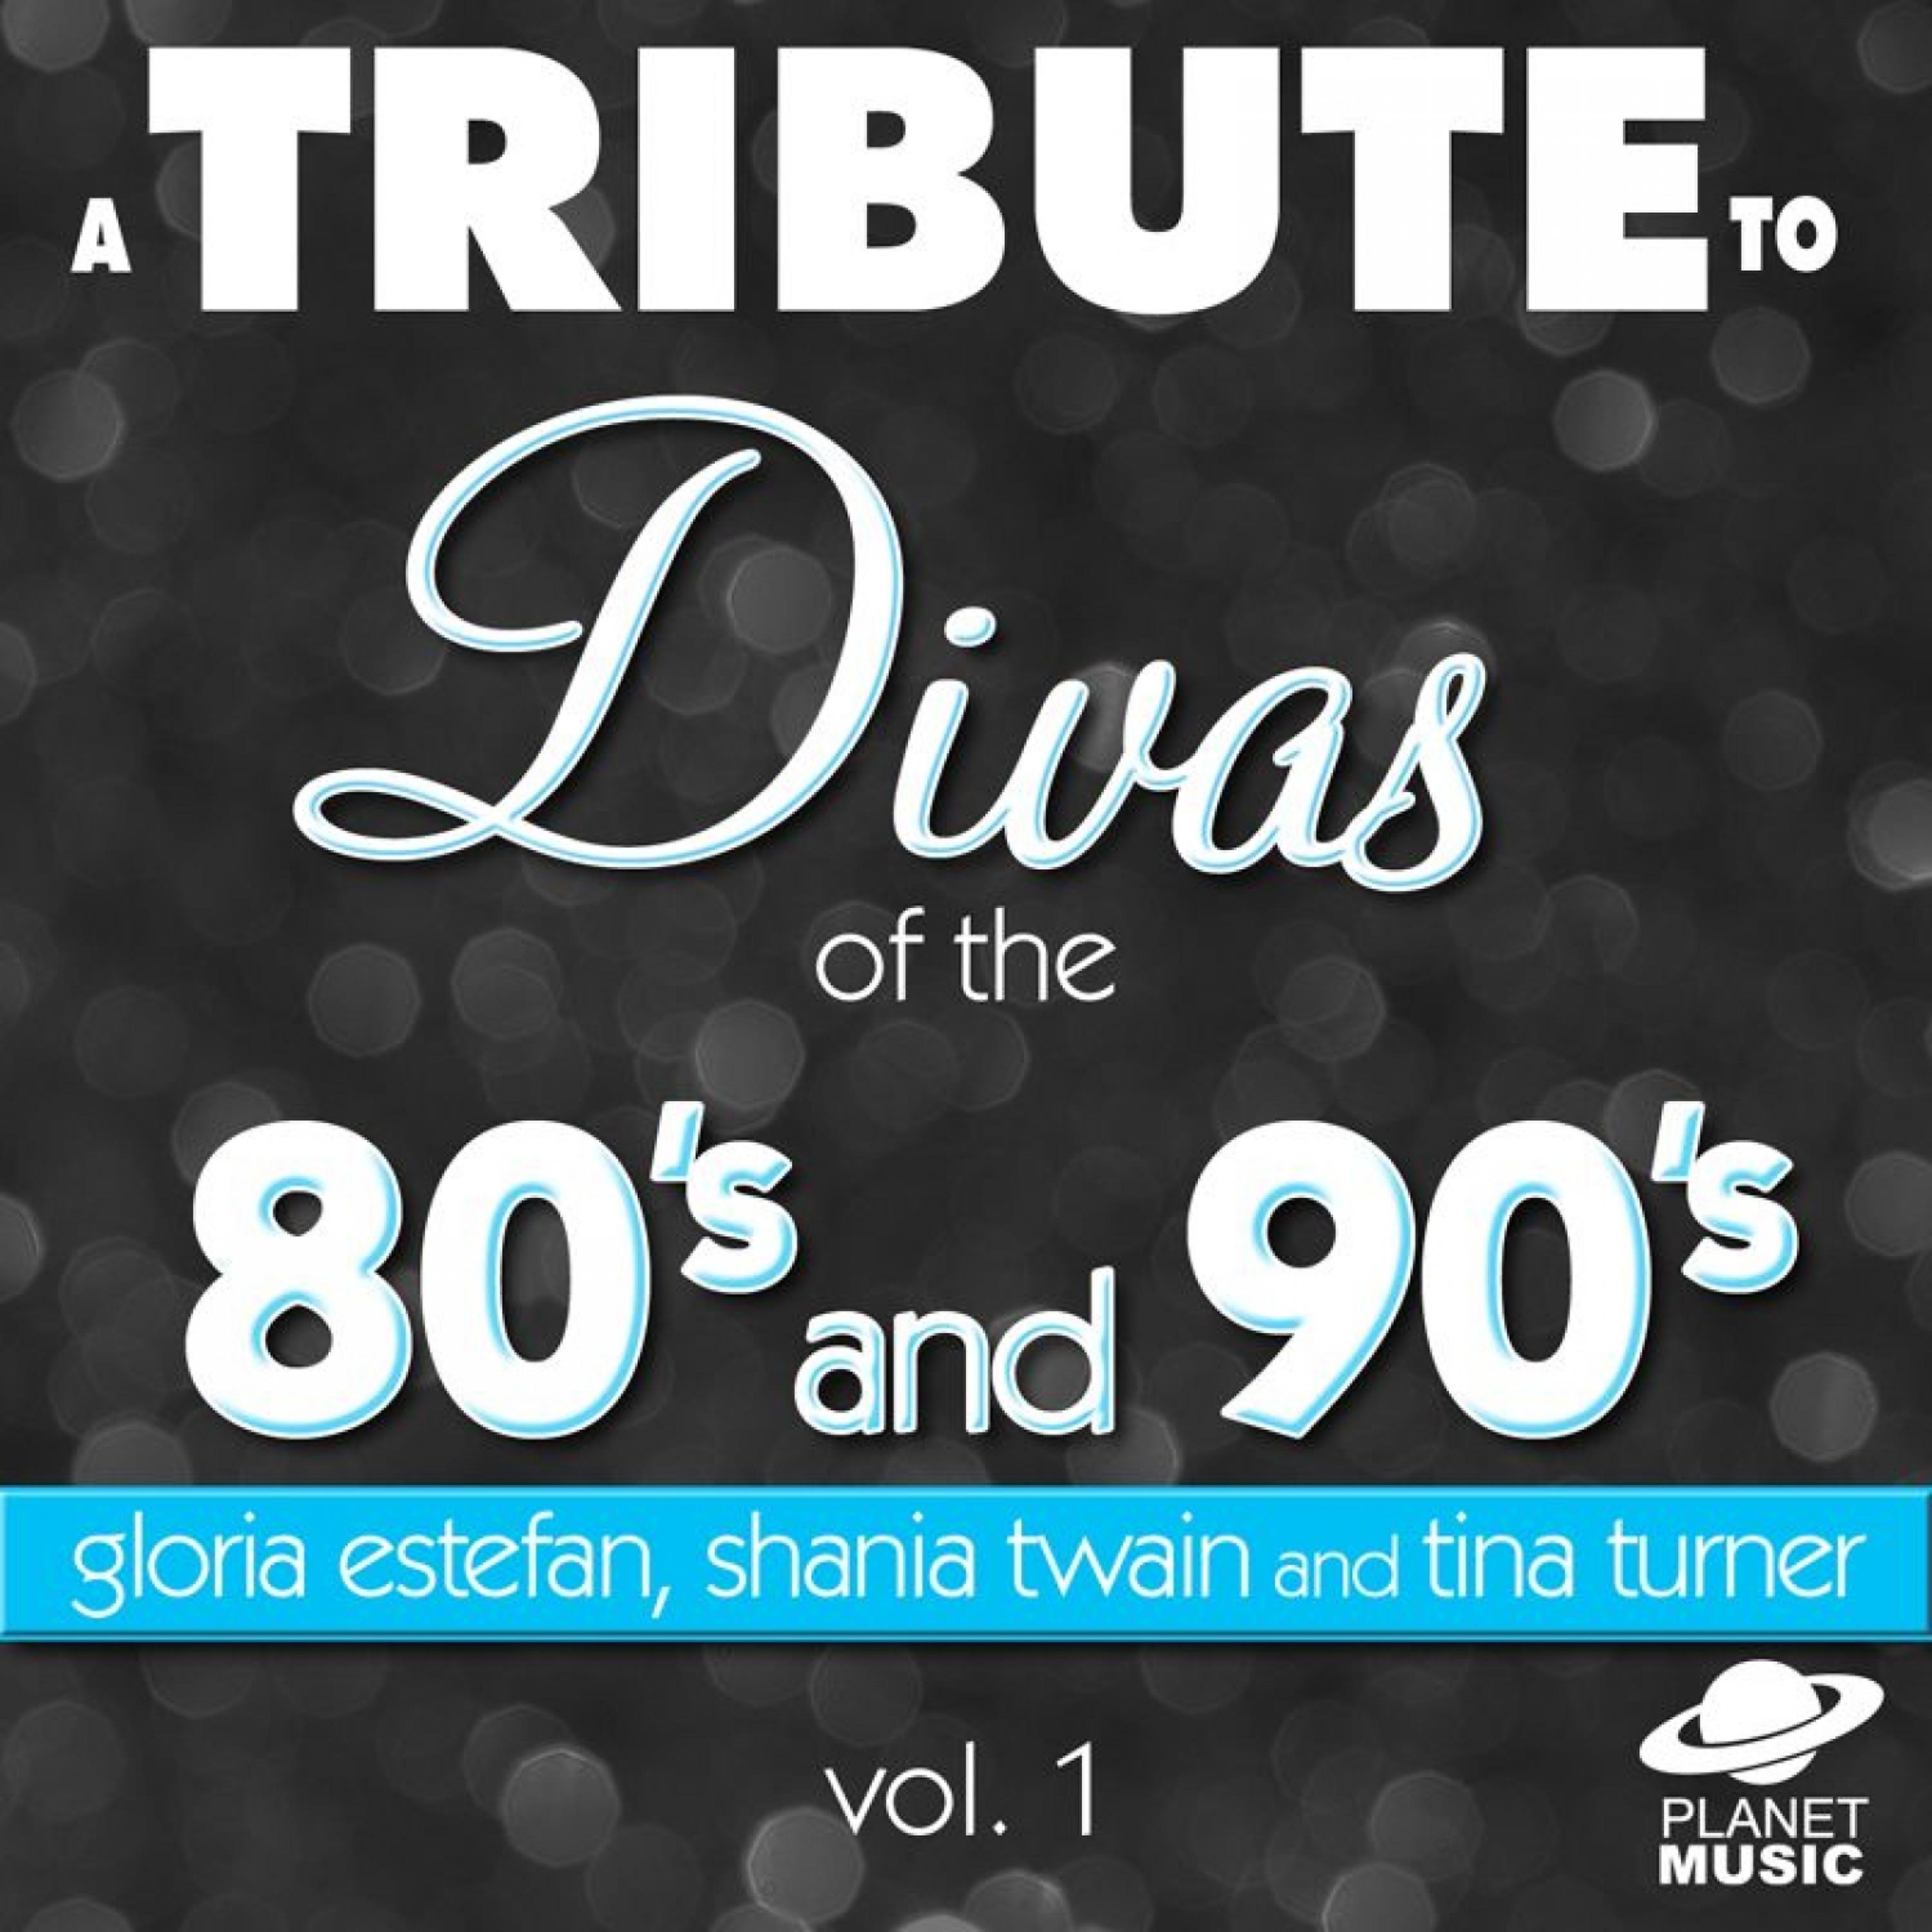 Постер альбома A Tribute to the Divas of the 80's and 90's: Gloria Estefan, Shania Twain and Tina Turner and Vol. 1